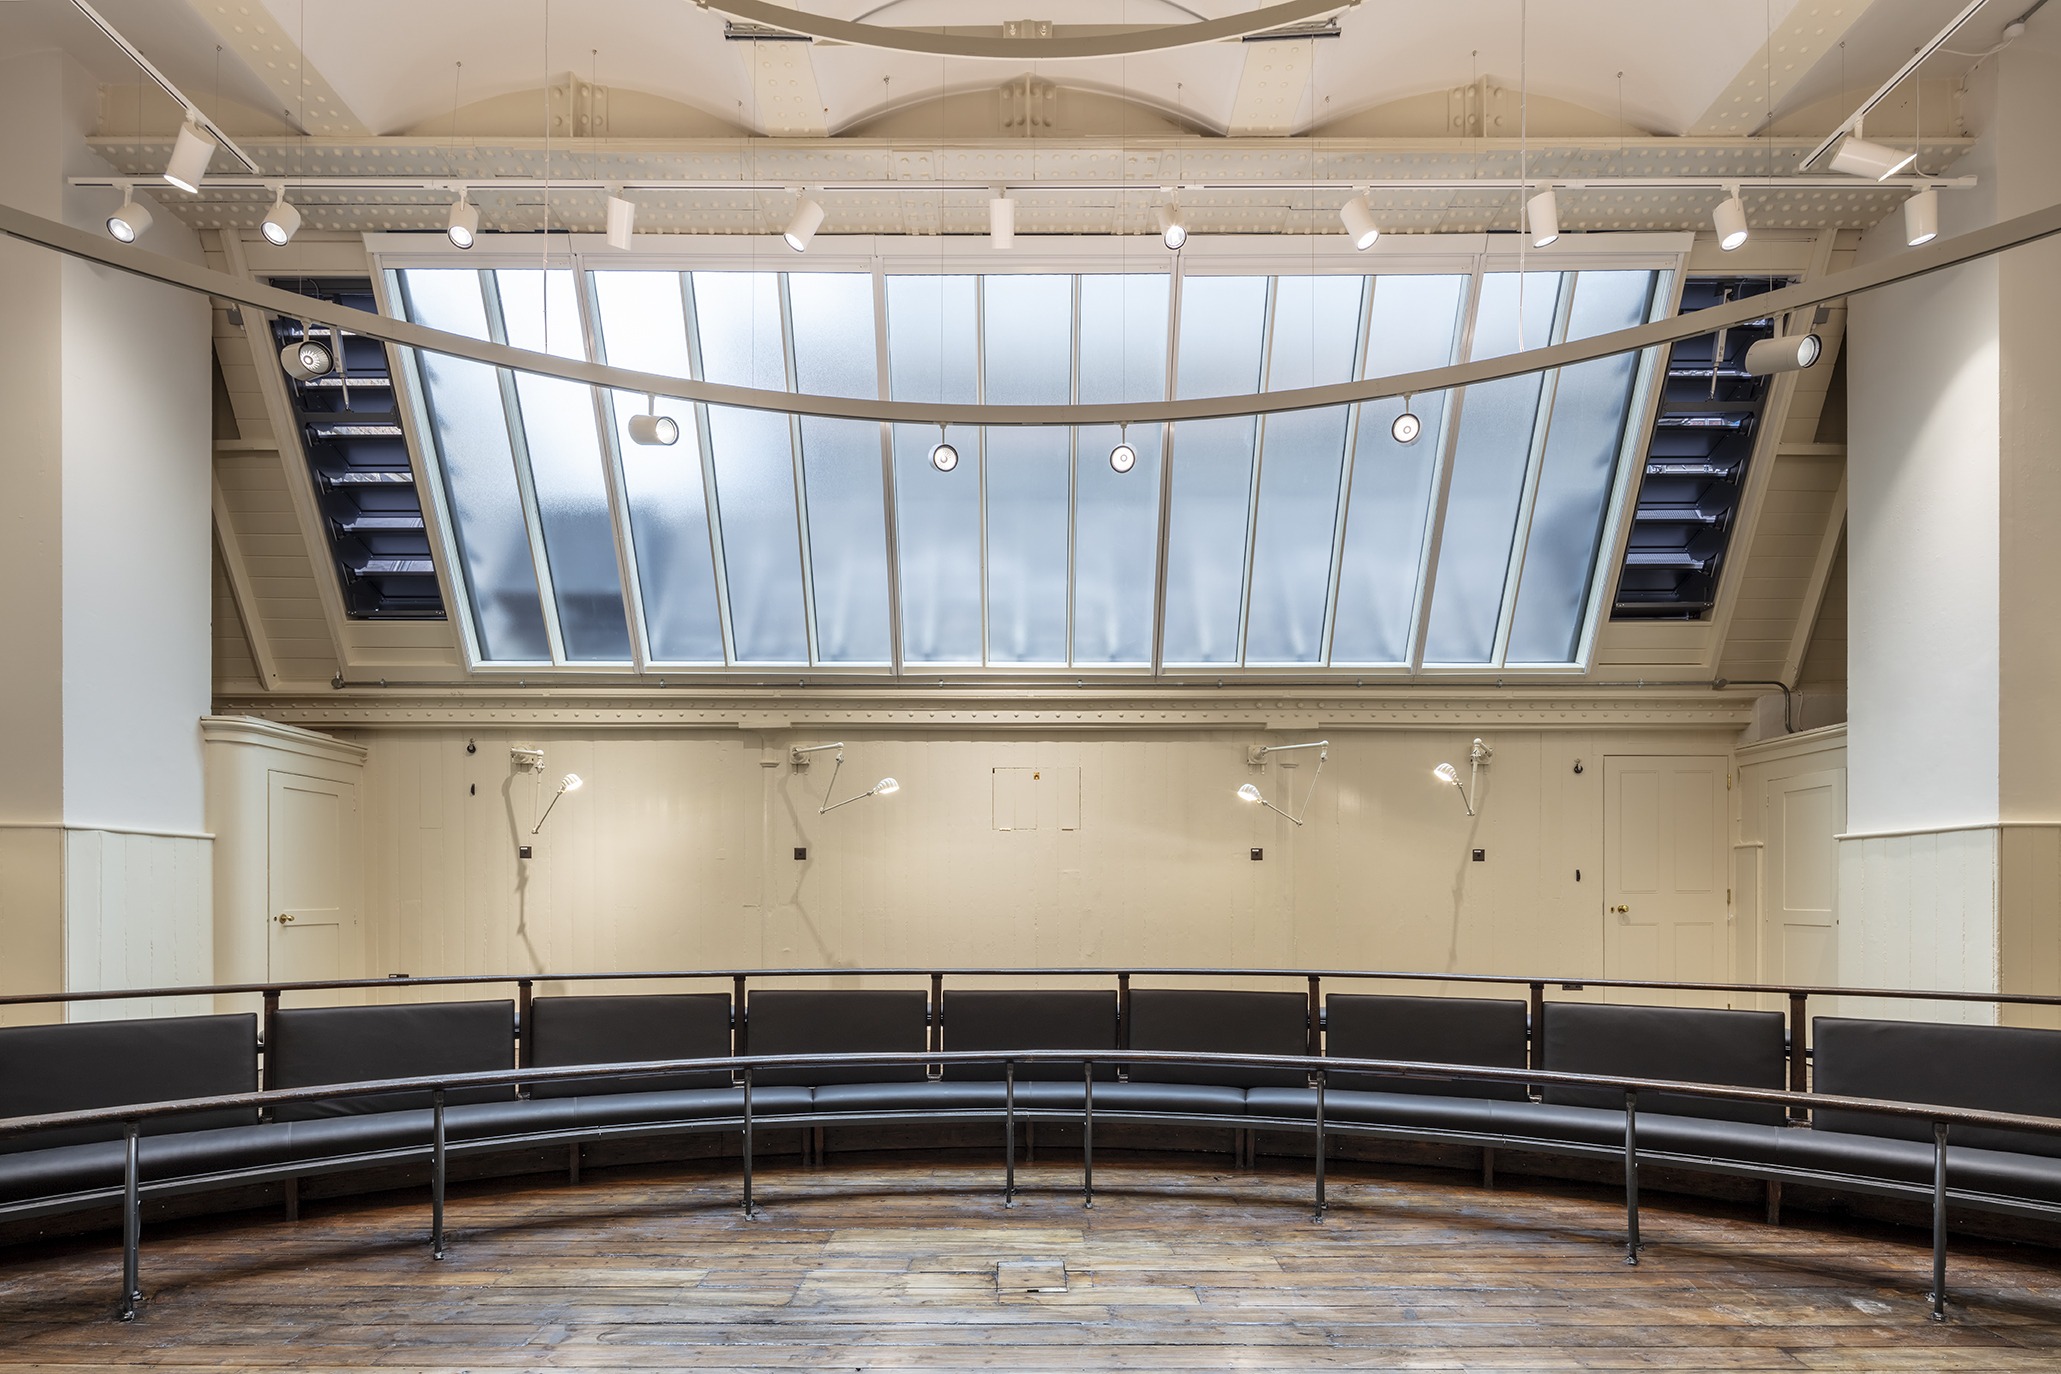 Project Completion – Royal Academy of Arts